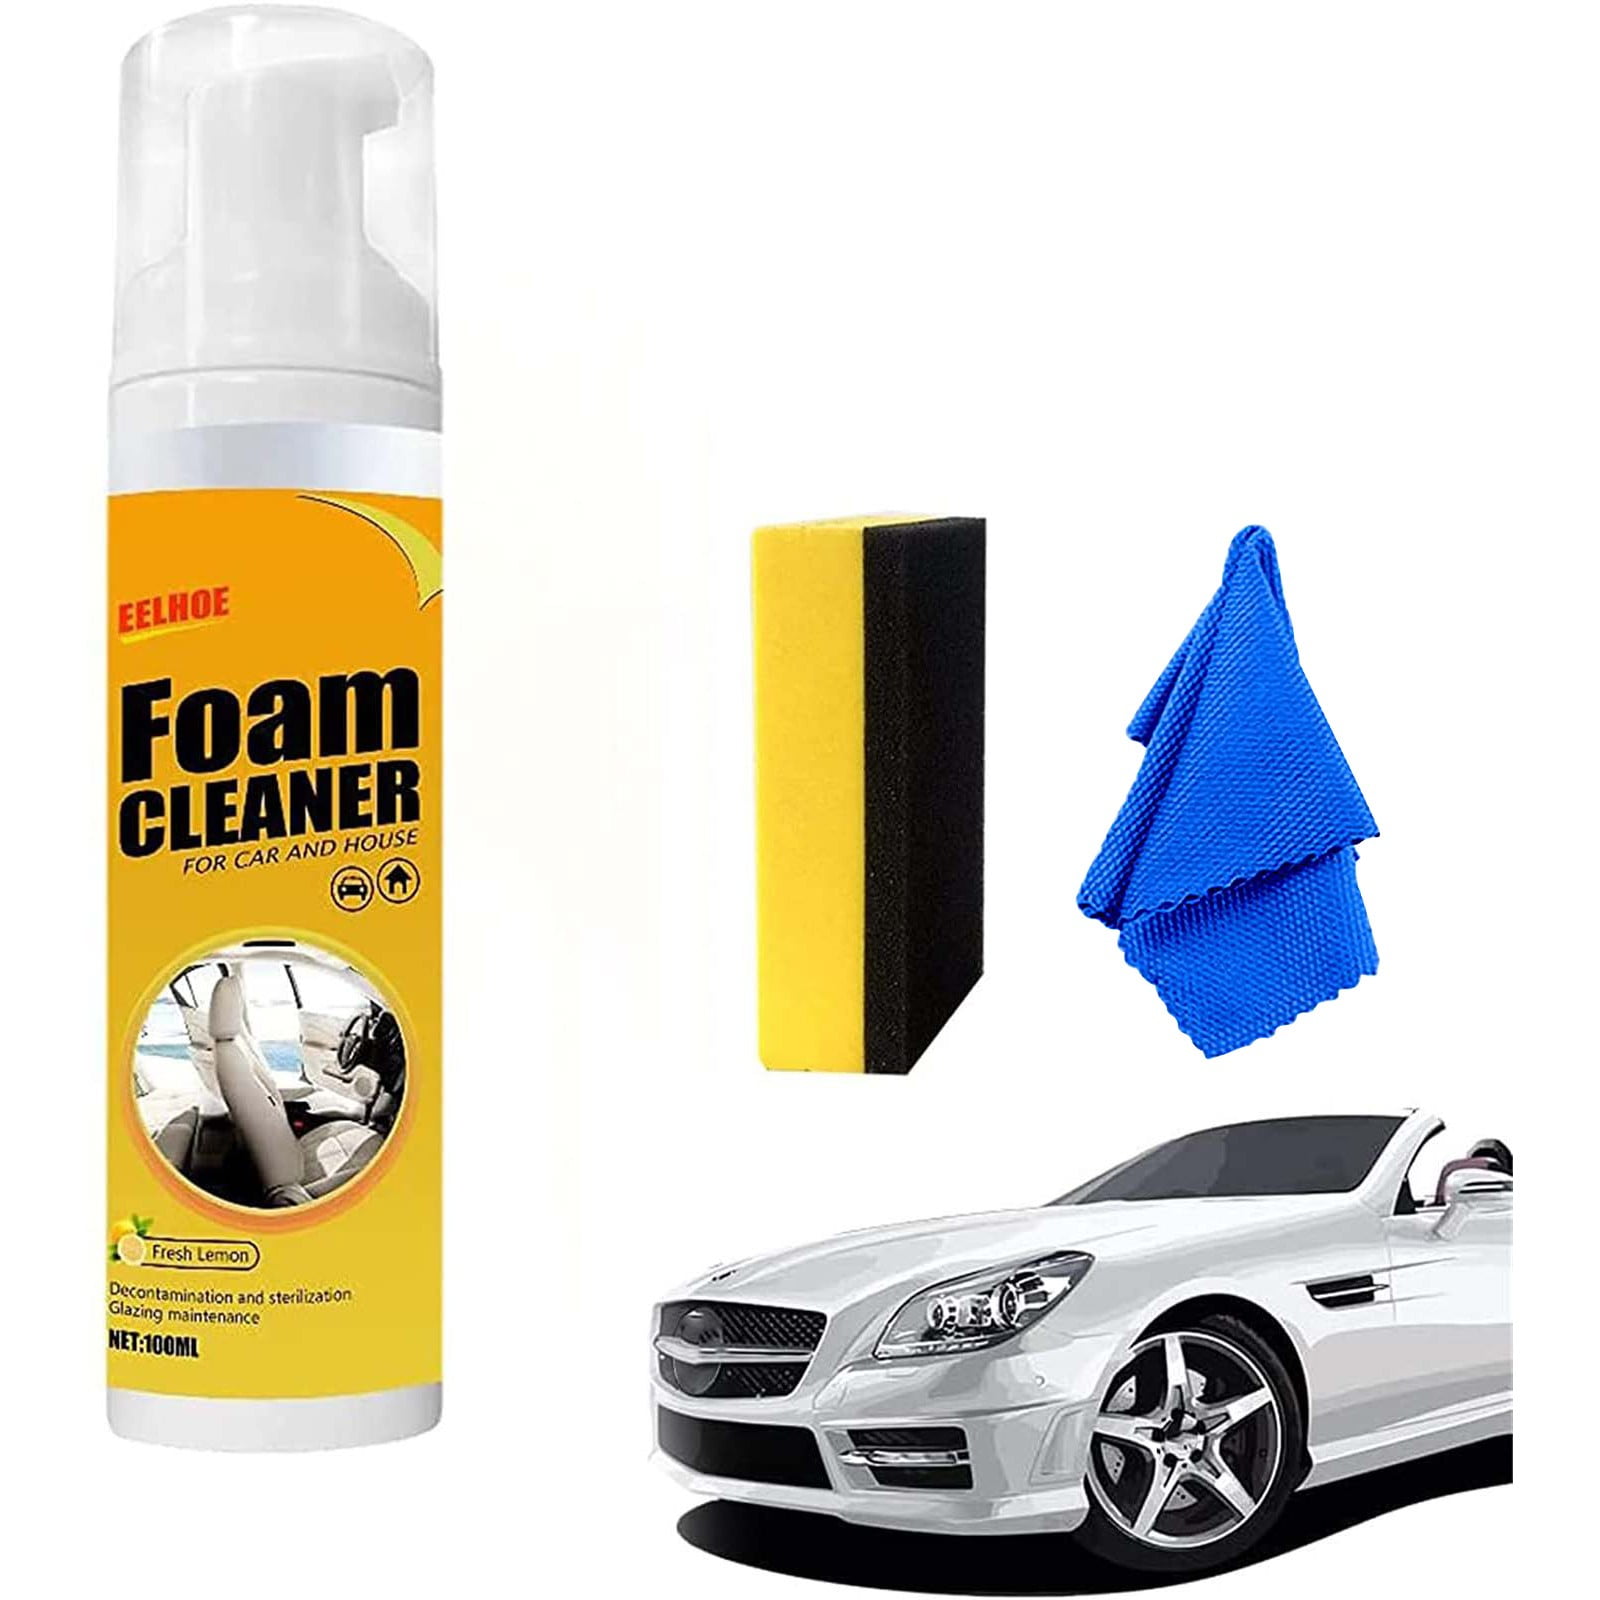 Car Cleaning All Purpose Foamy Spray Cleaner - China Spray Foam Cleaner,  All Purpose Foam Cleaner